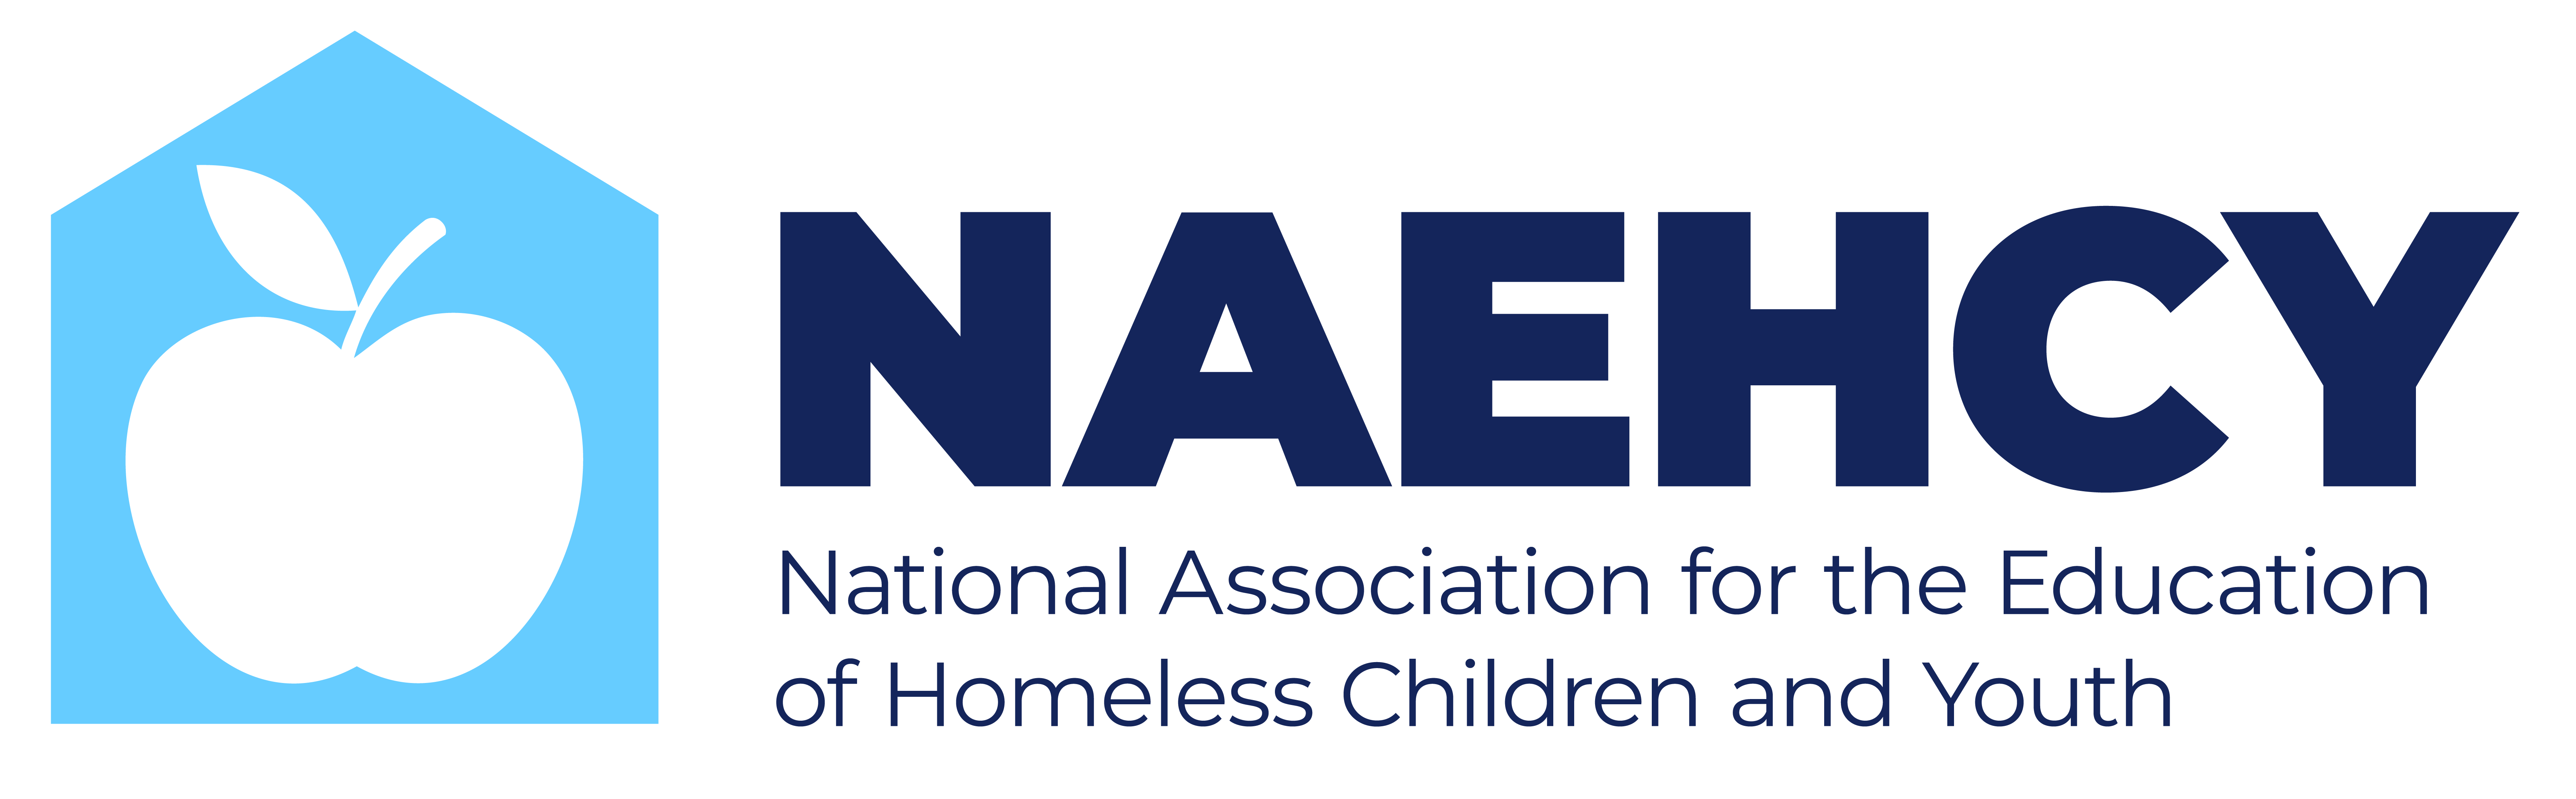 National Association for the Education of Homeless Children and Youth 